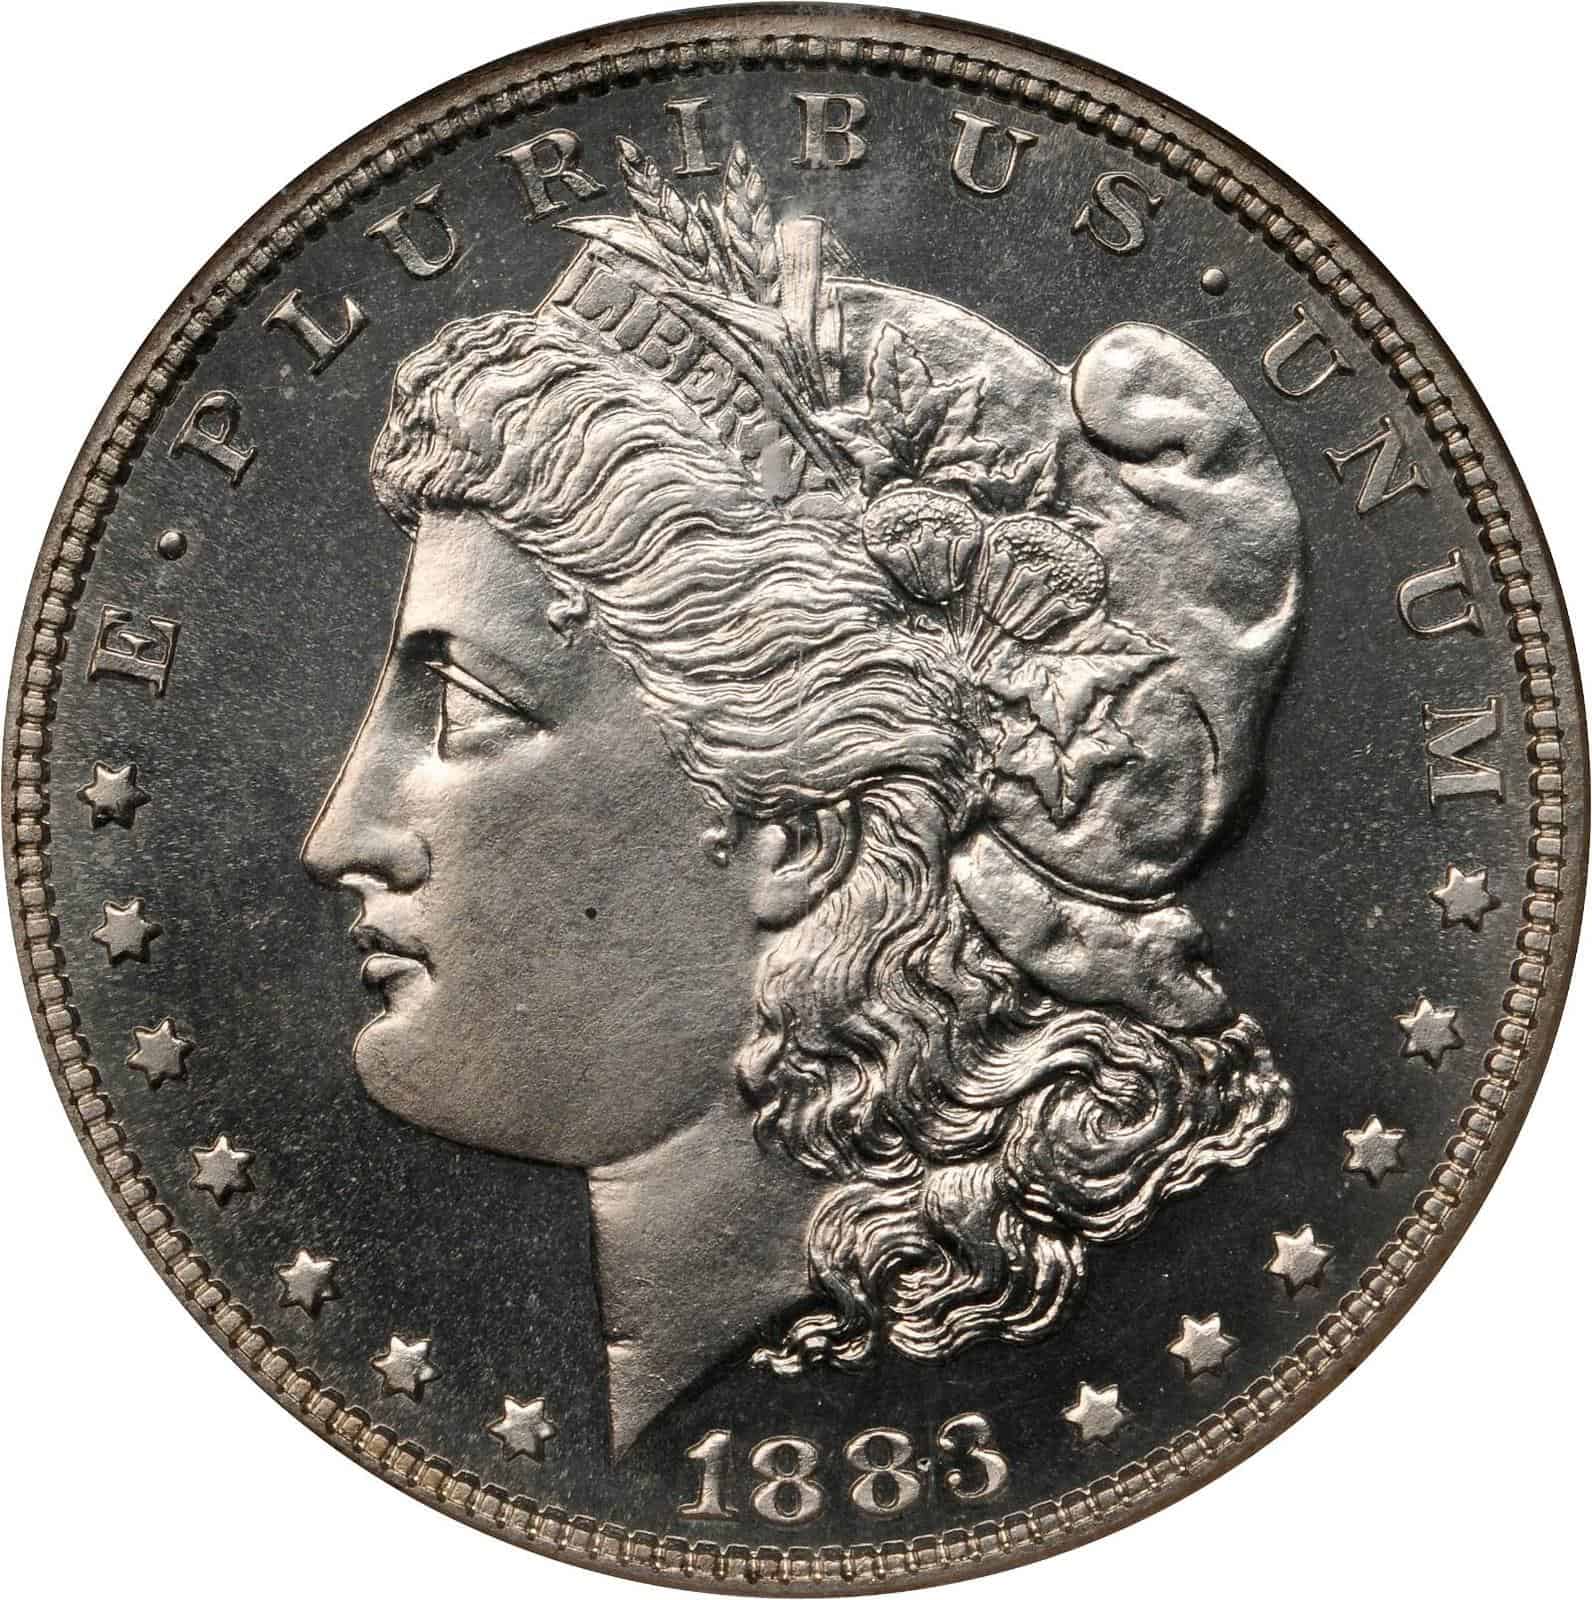 The Obverse of the 1883 Silver Dollar